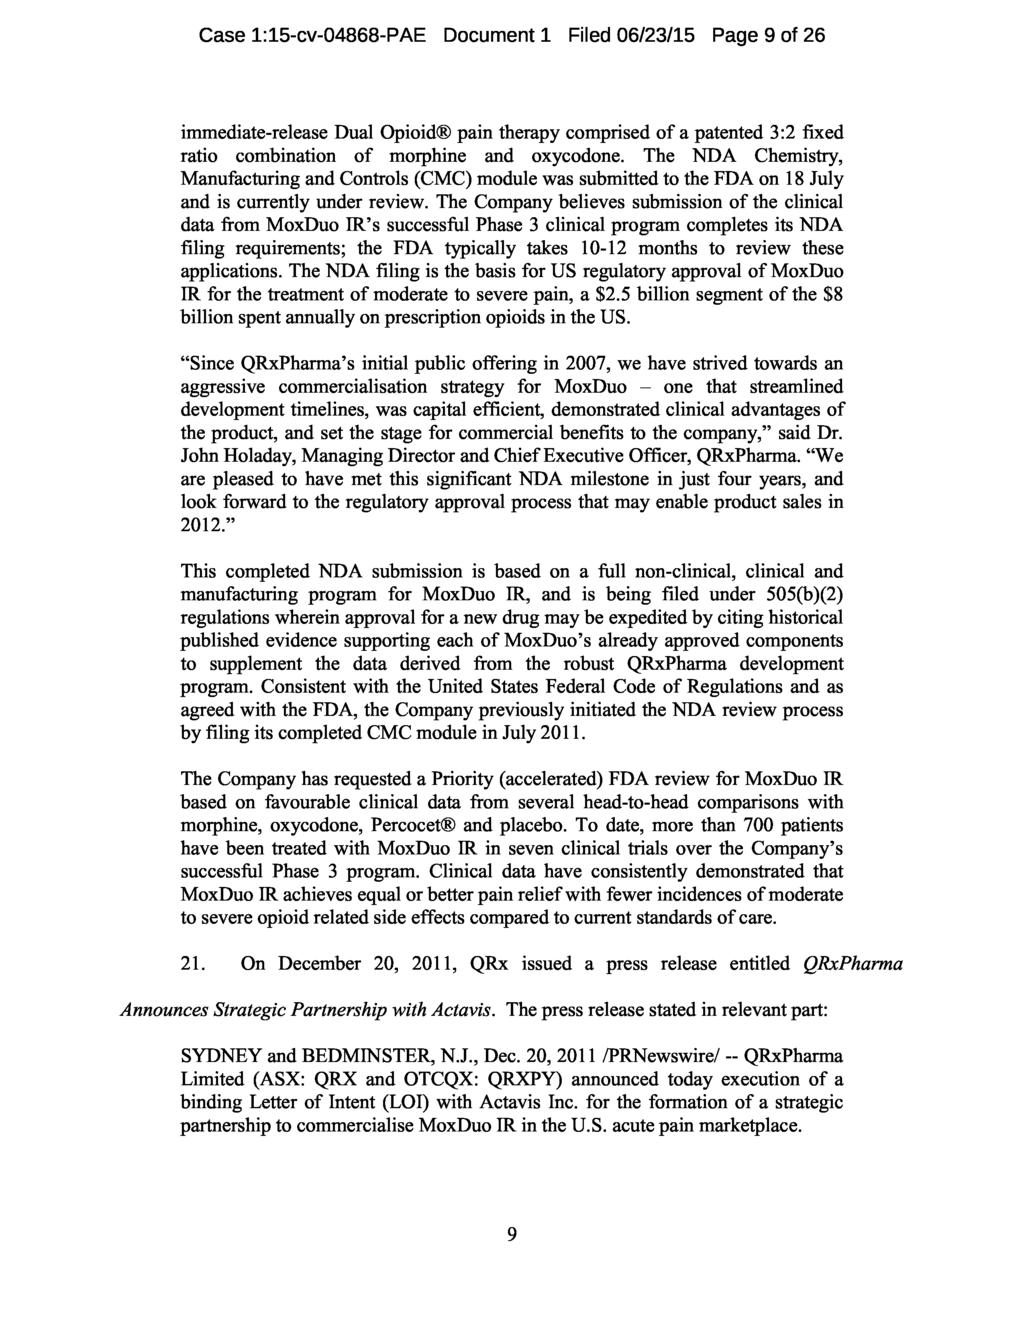 Case 1:15-cv-04868-PAE Document 1 Filed 06/23/15 Page 9 of 26 immediate-release Dual Opioid pain therapy comprised of a patented 3:2 fixed ratio combination of morphine and oxycodone.